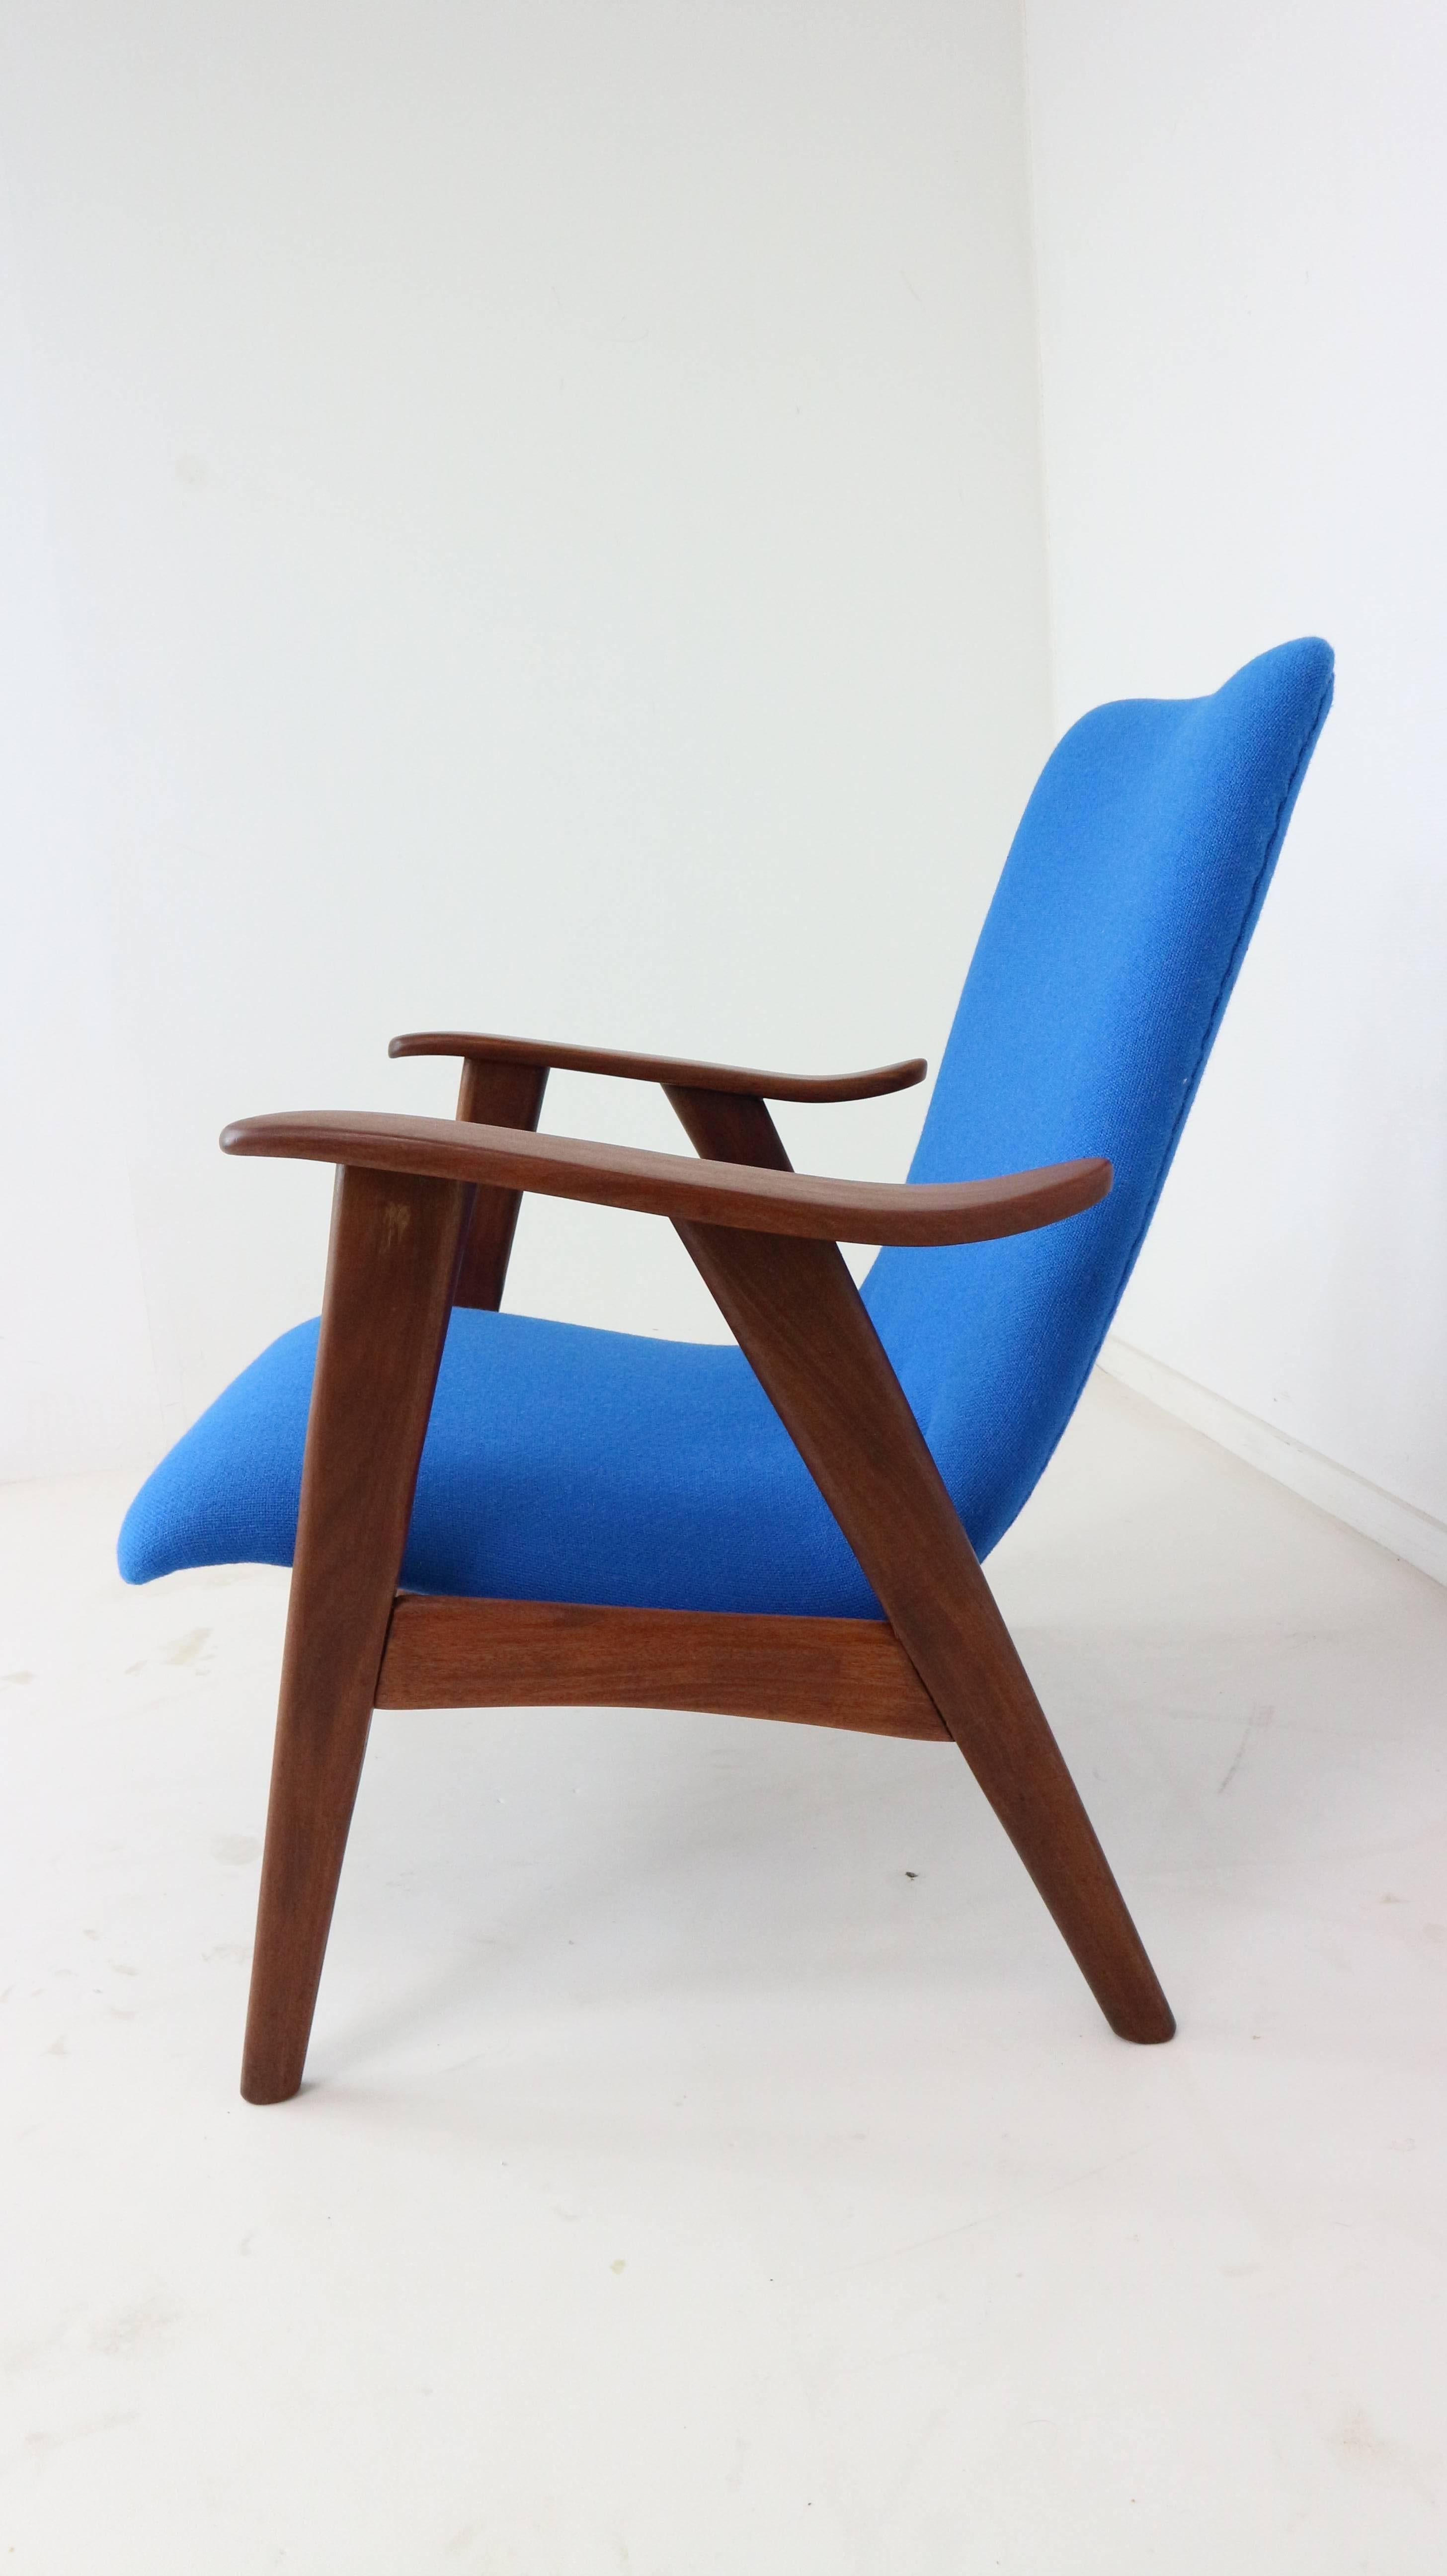 This lounge chair comes with a beautiful organic shaped teak frame, in newly upholstered blue Kvadrat fabric. This chair remains in excellent condition with minor signs of wear.